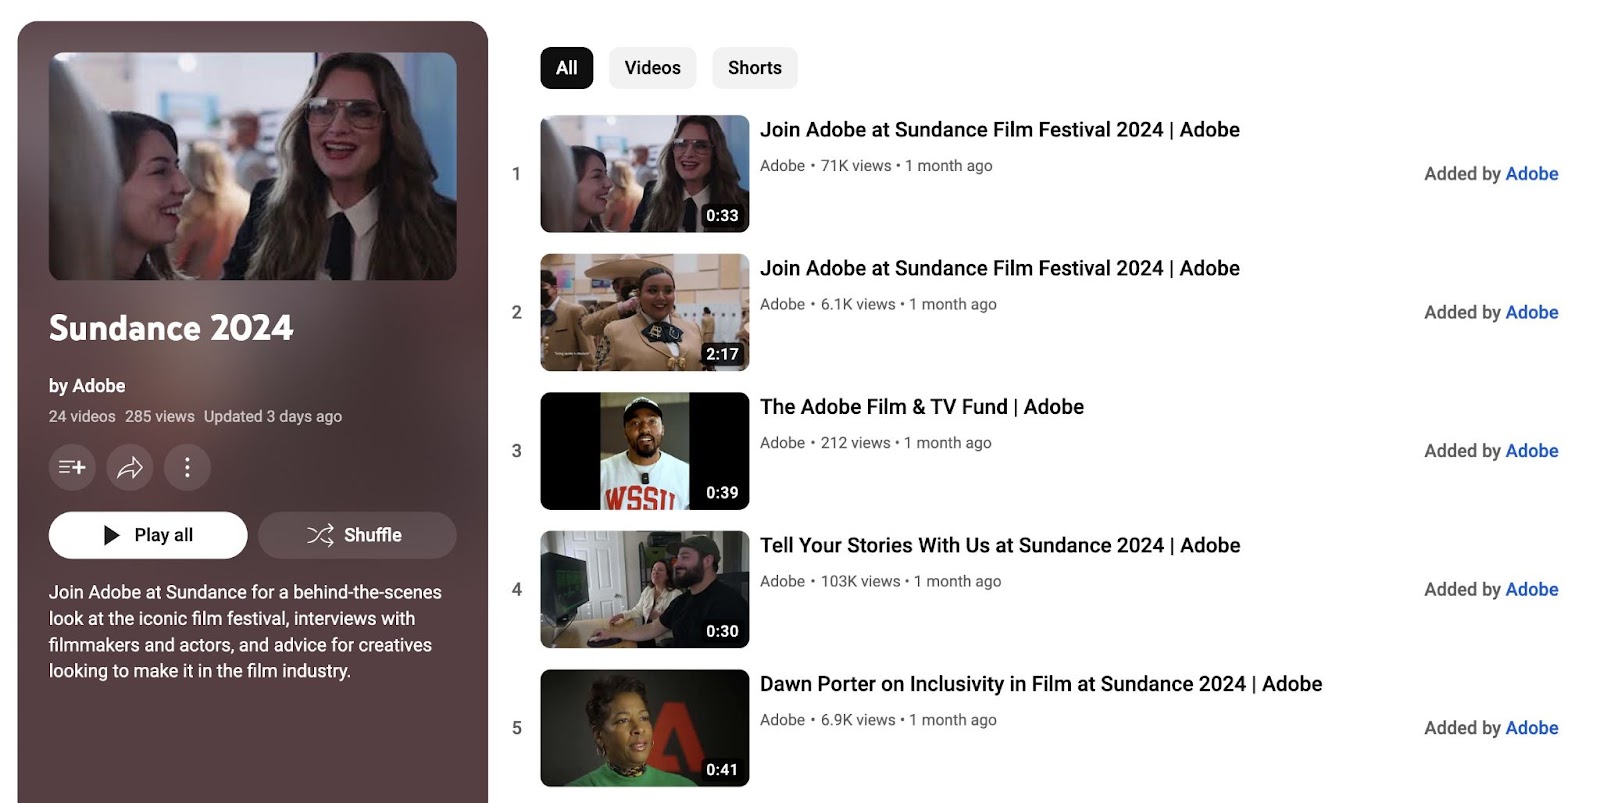 A series of short video interviews "Sundance 2024" on Adobe's YouTube channel